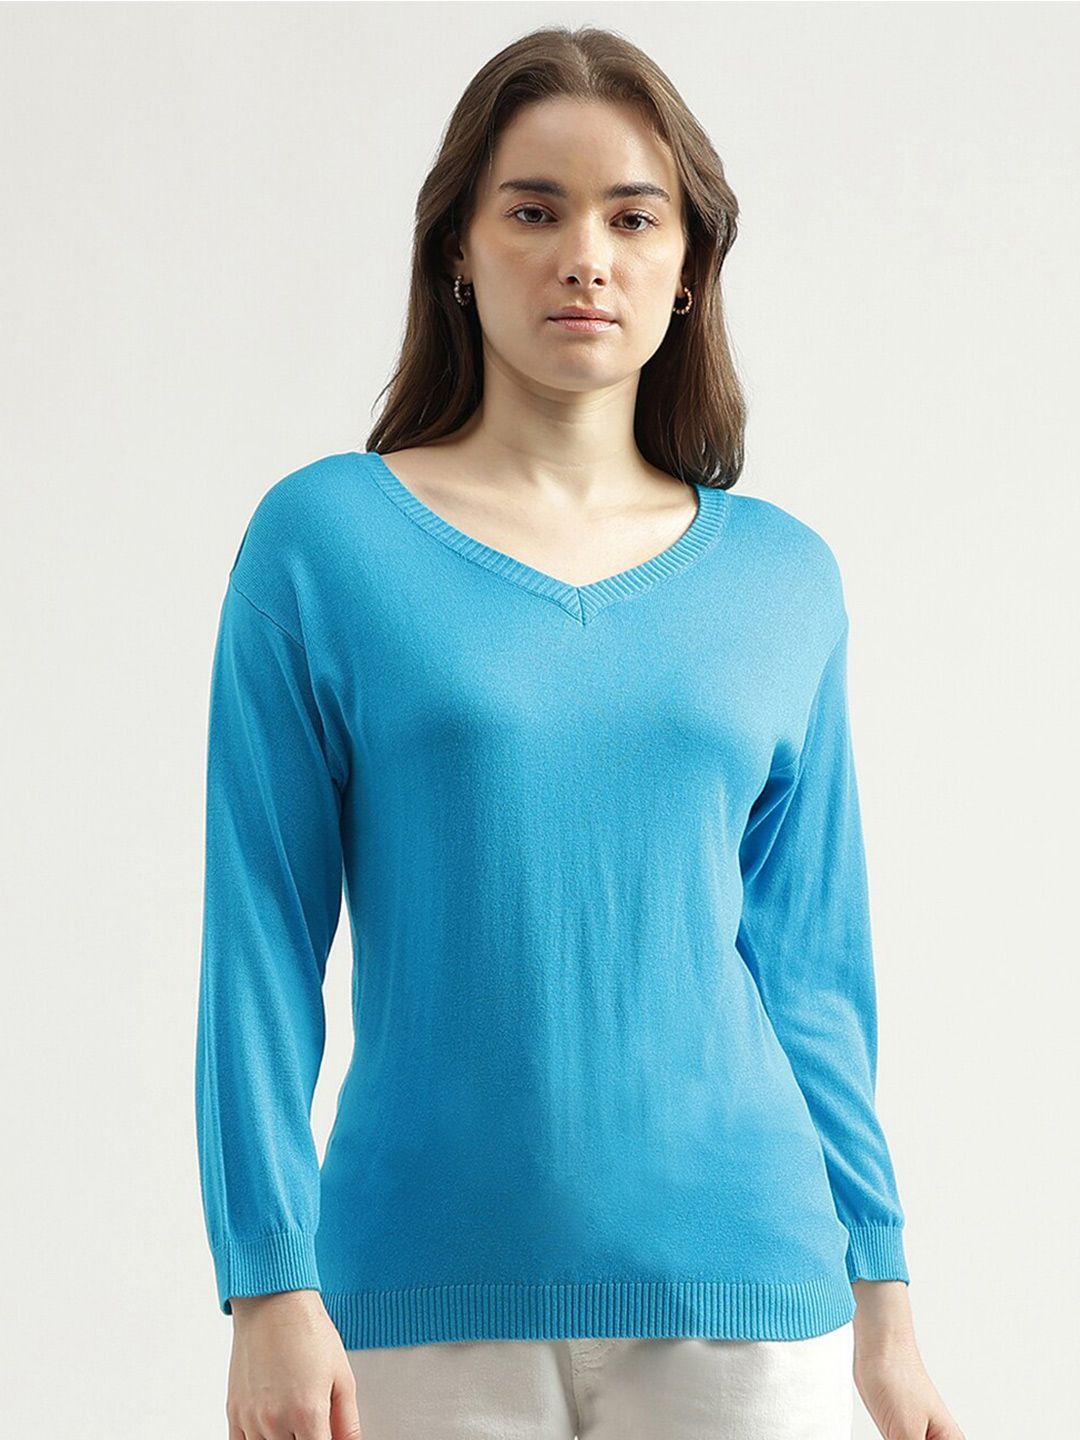 united-colors-of-benetton-v-neck-ribbed-pullover-sweater